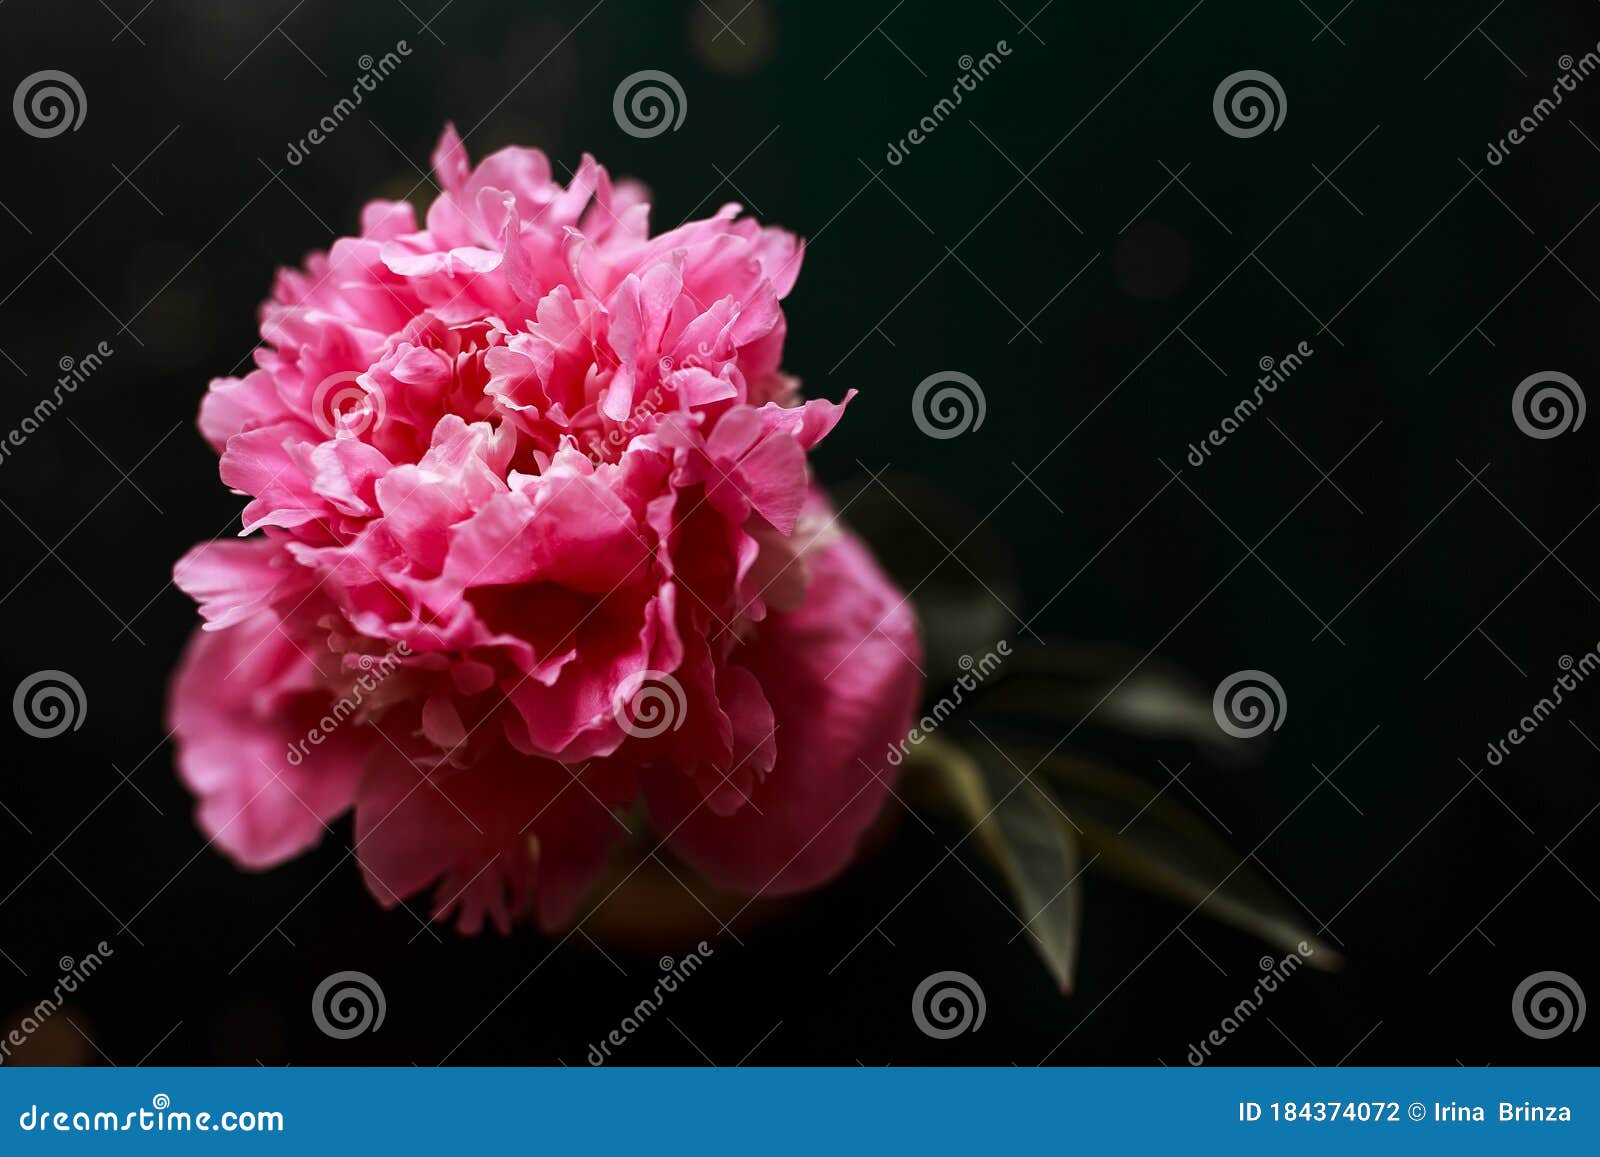 Pink Peony In A Black Background Stock Photo Image Of Garden Postcard 184374072